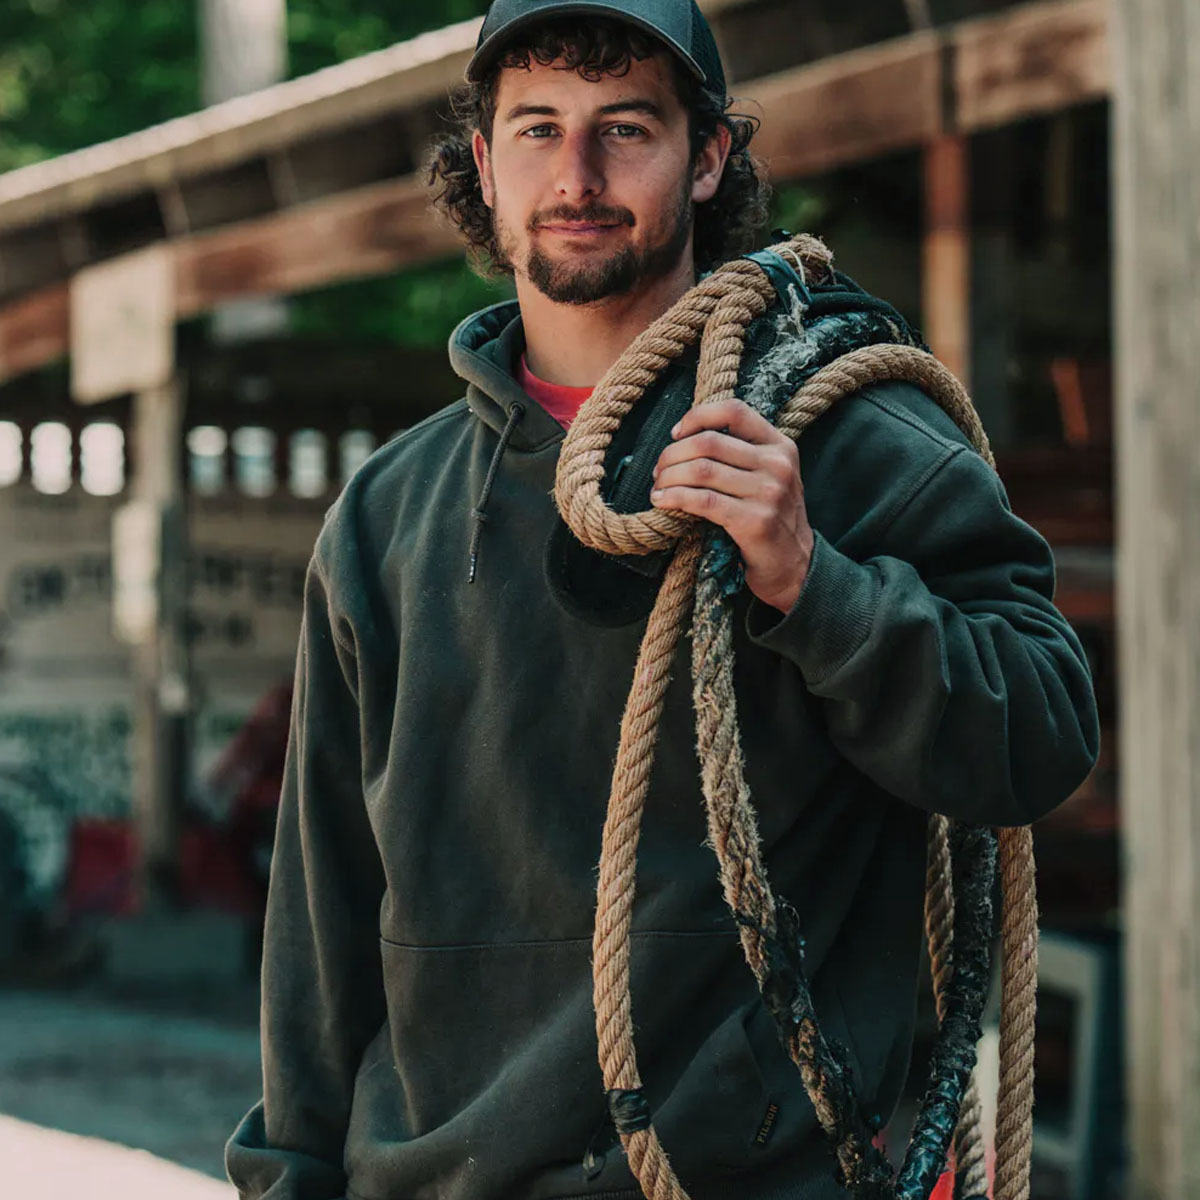 Filson Prospector Hoodie Fir, an ideal baselayer in cold weather conditions